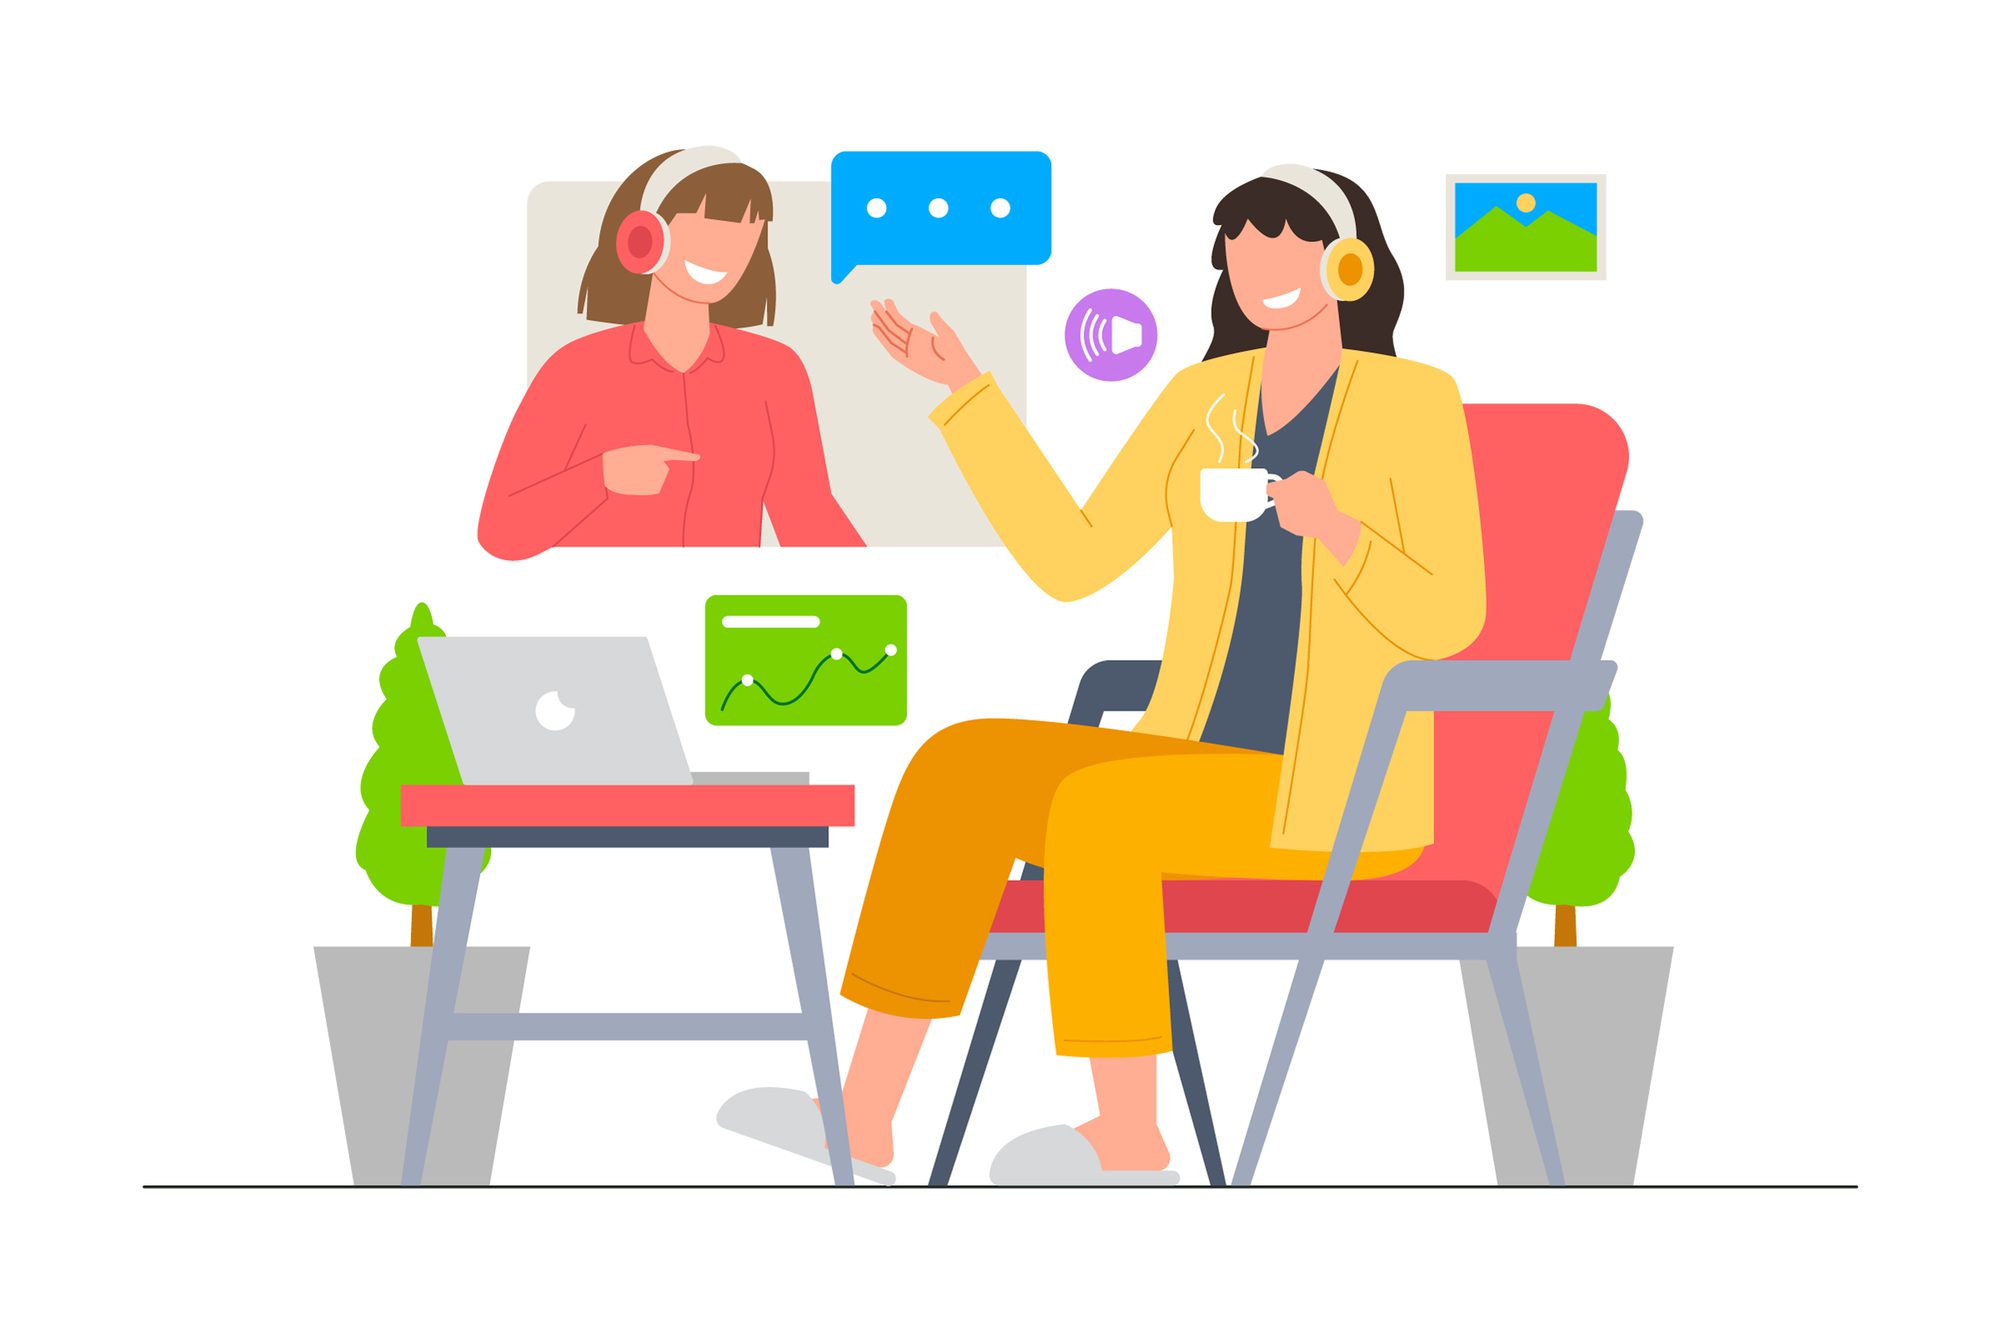 vector image of two women talking in a virtual meeting space like Microsoft Teams